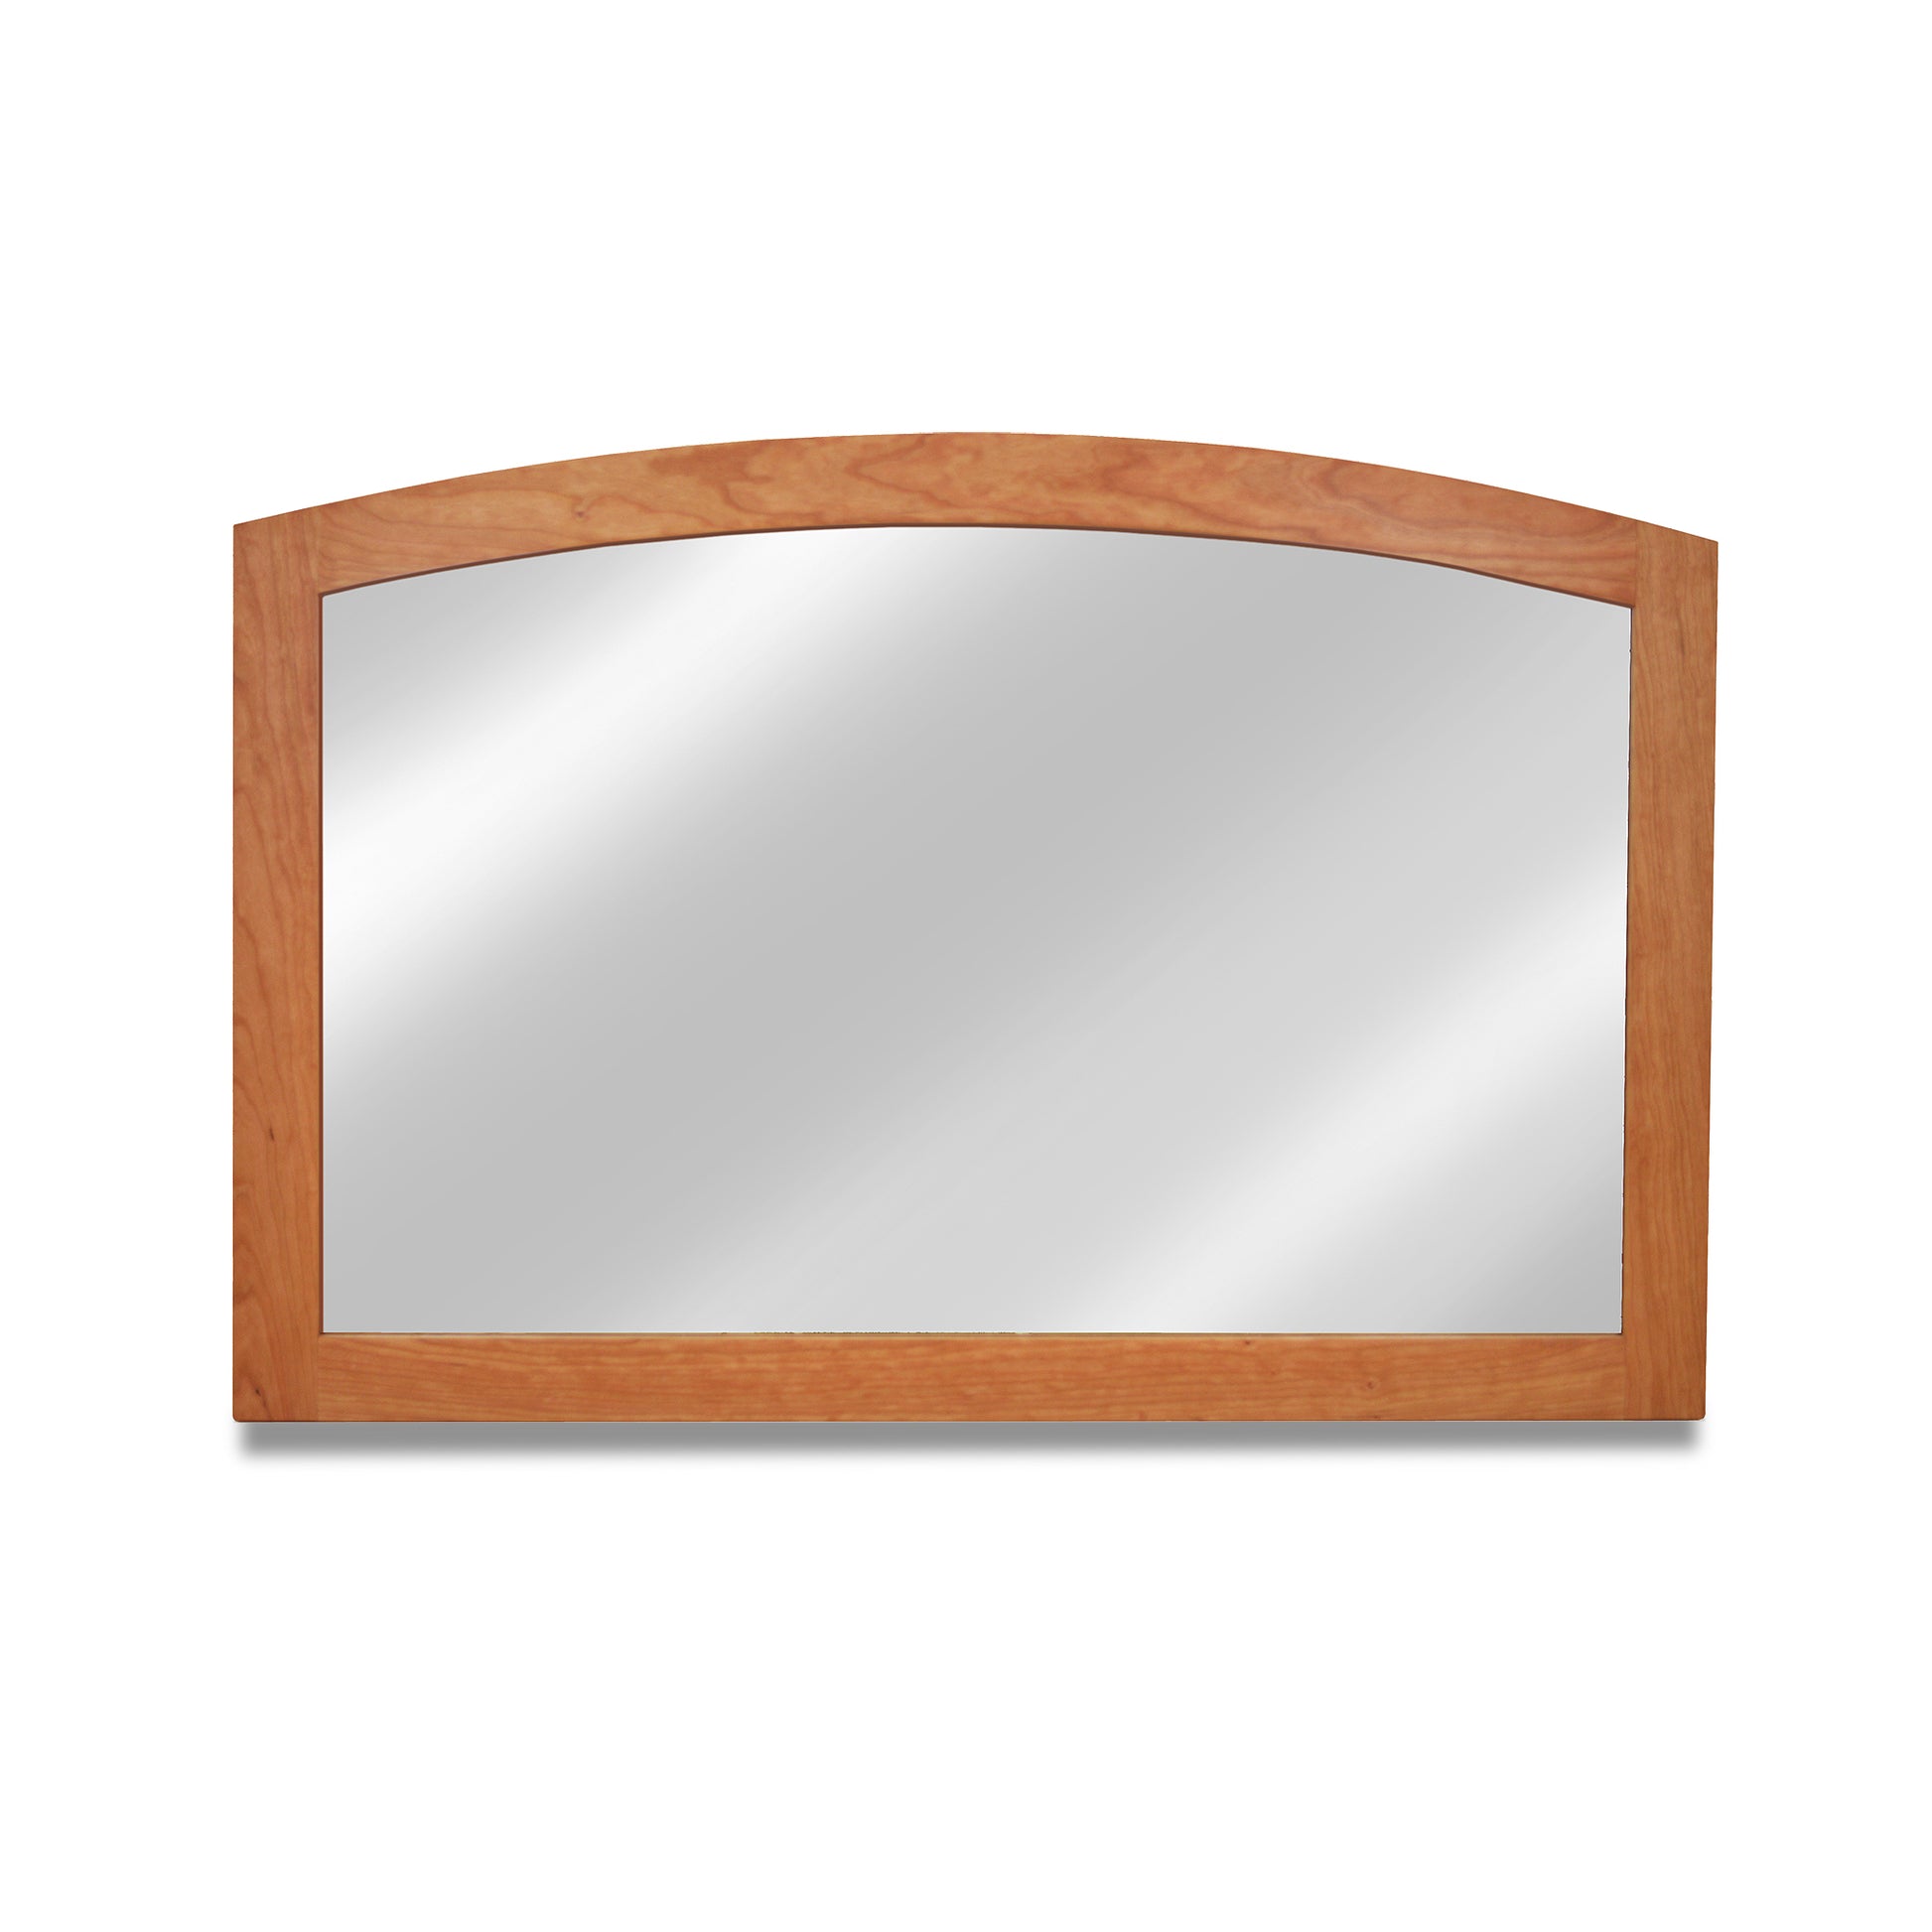 An American Shaker Arched Mirror with a hardwood frame on a white background by Maple Corner Woodworks.